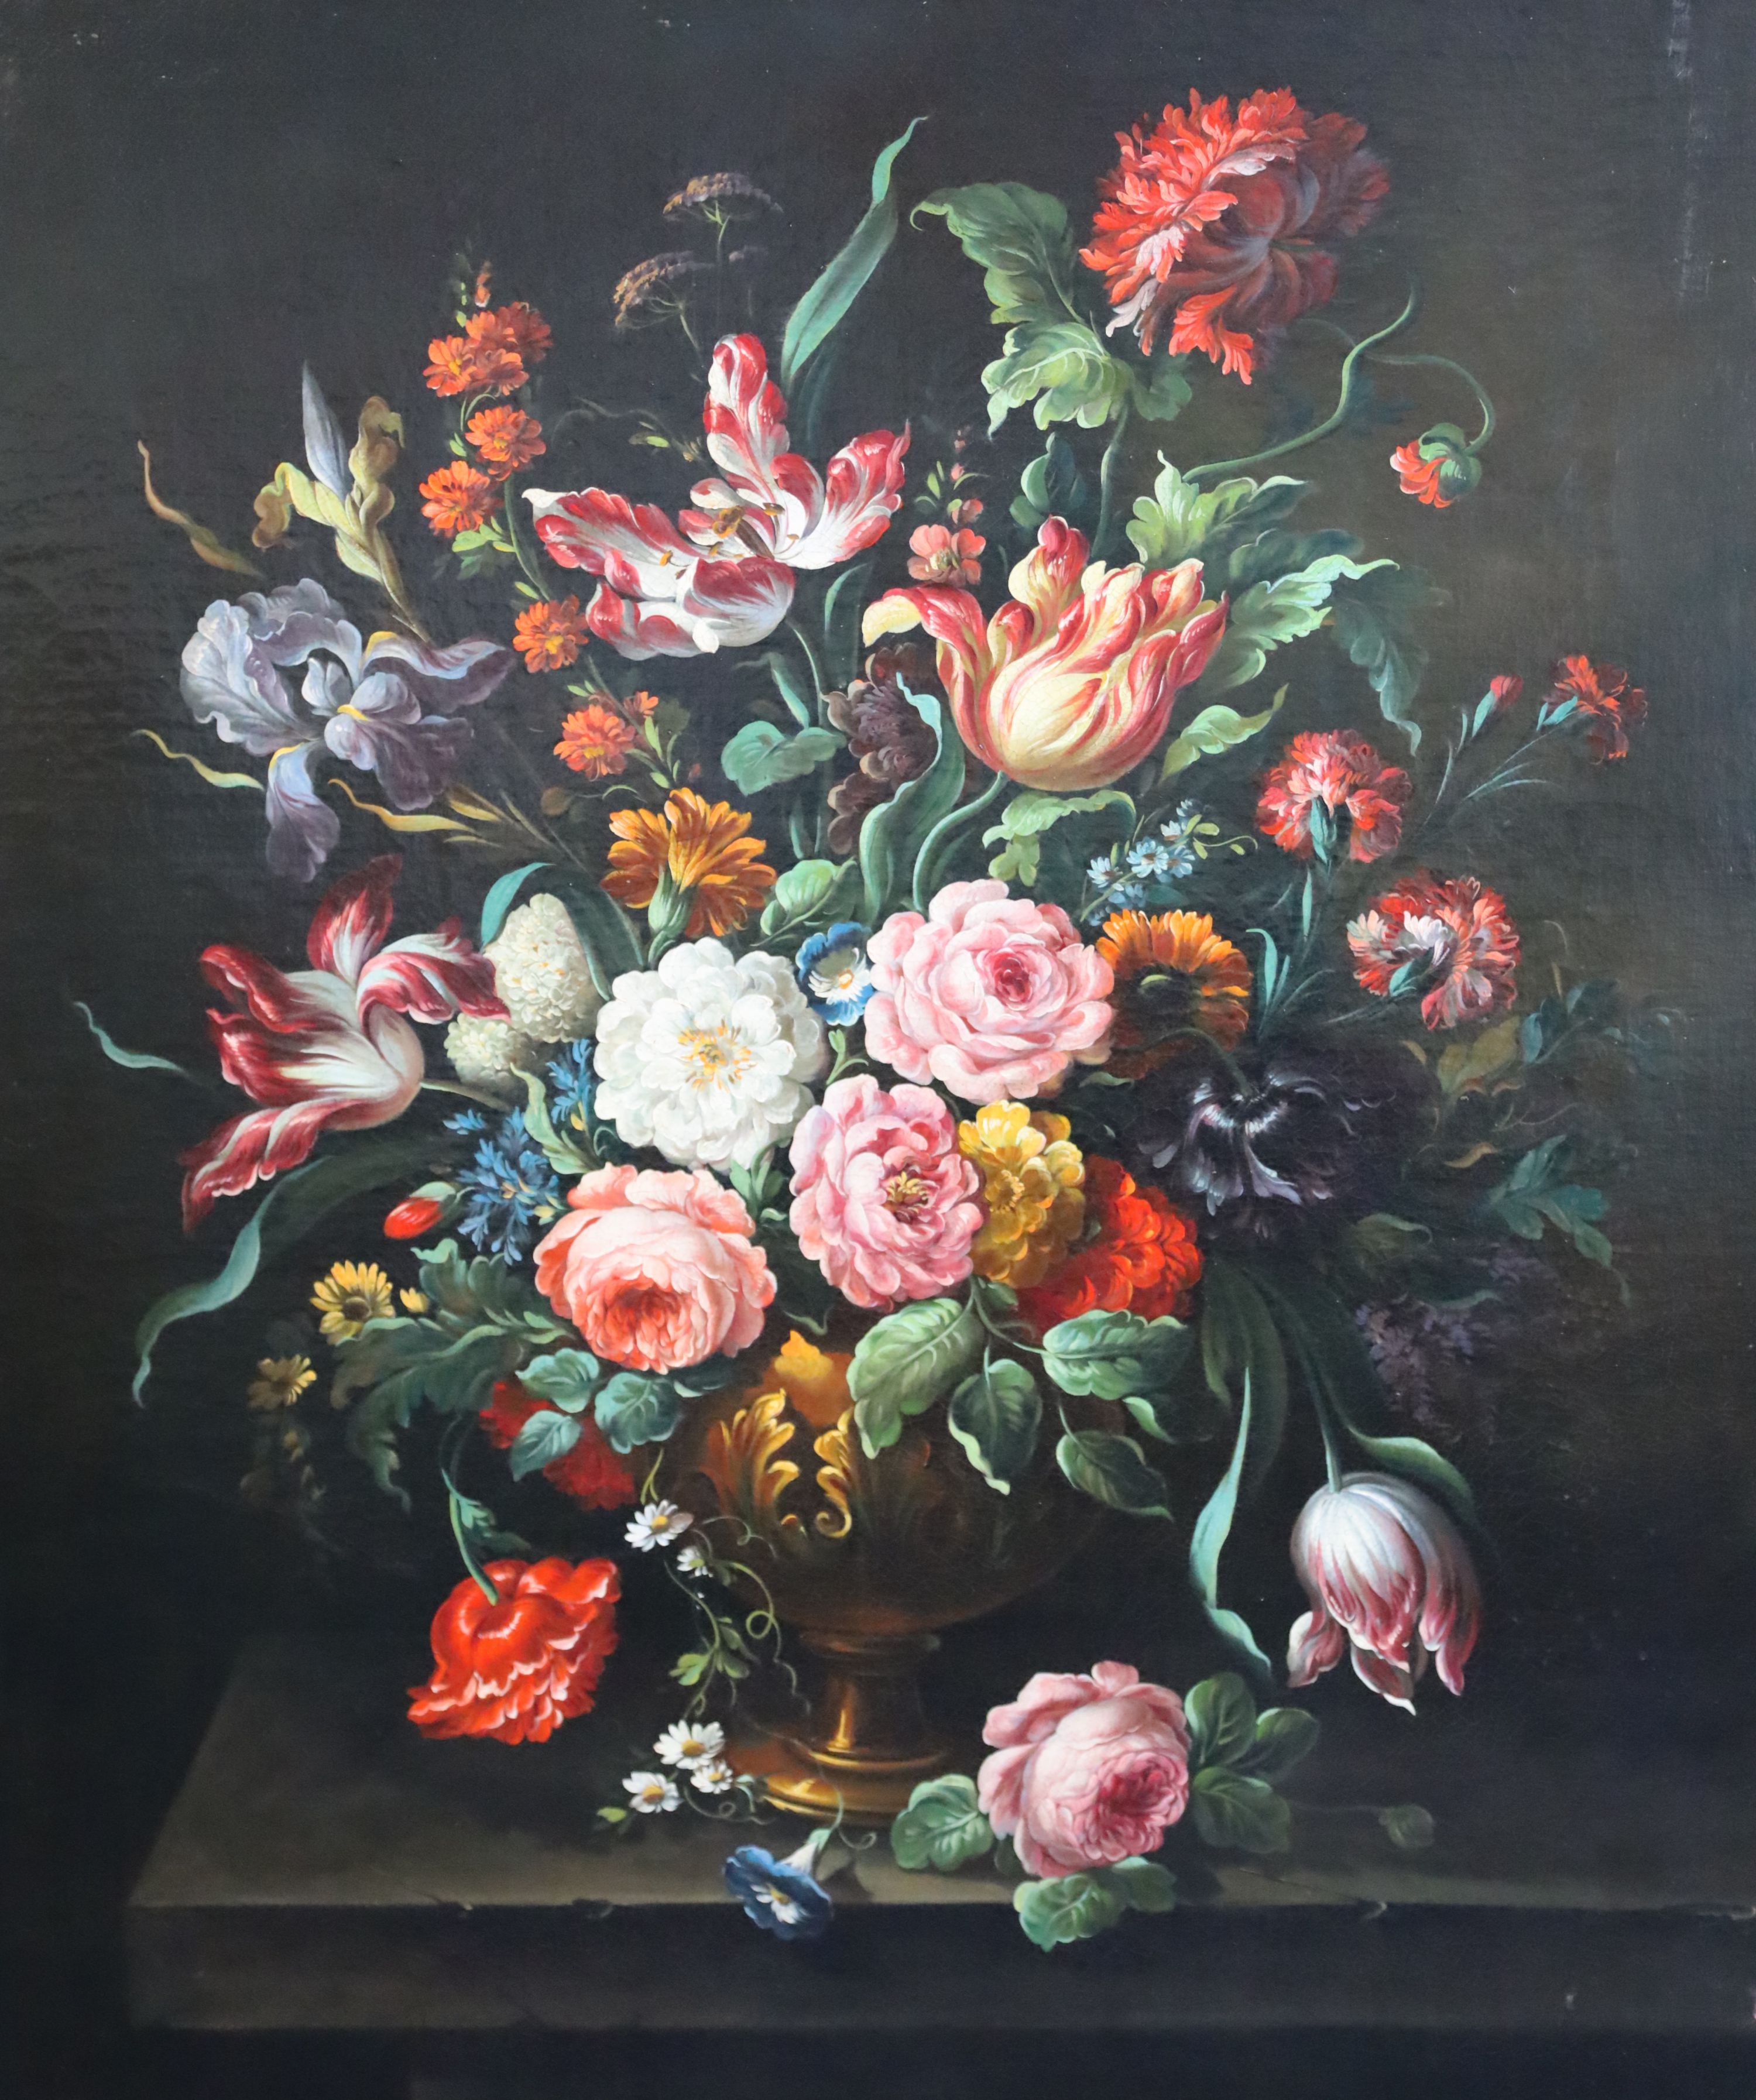 17th century Dutch style Still life of flowers in an urn upon a ledge 35 x 29in.